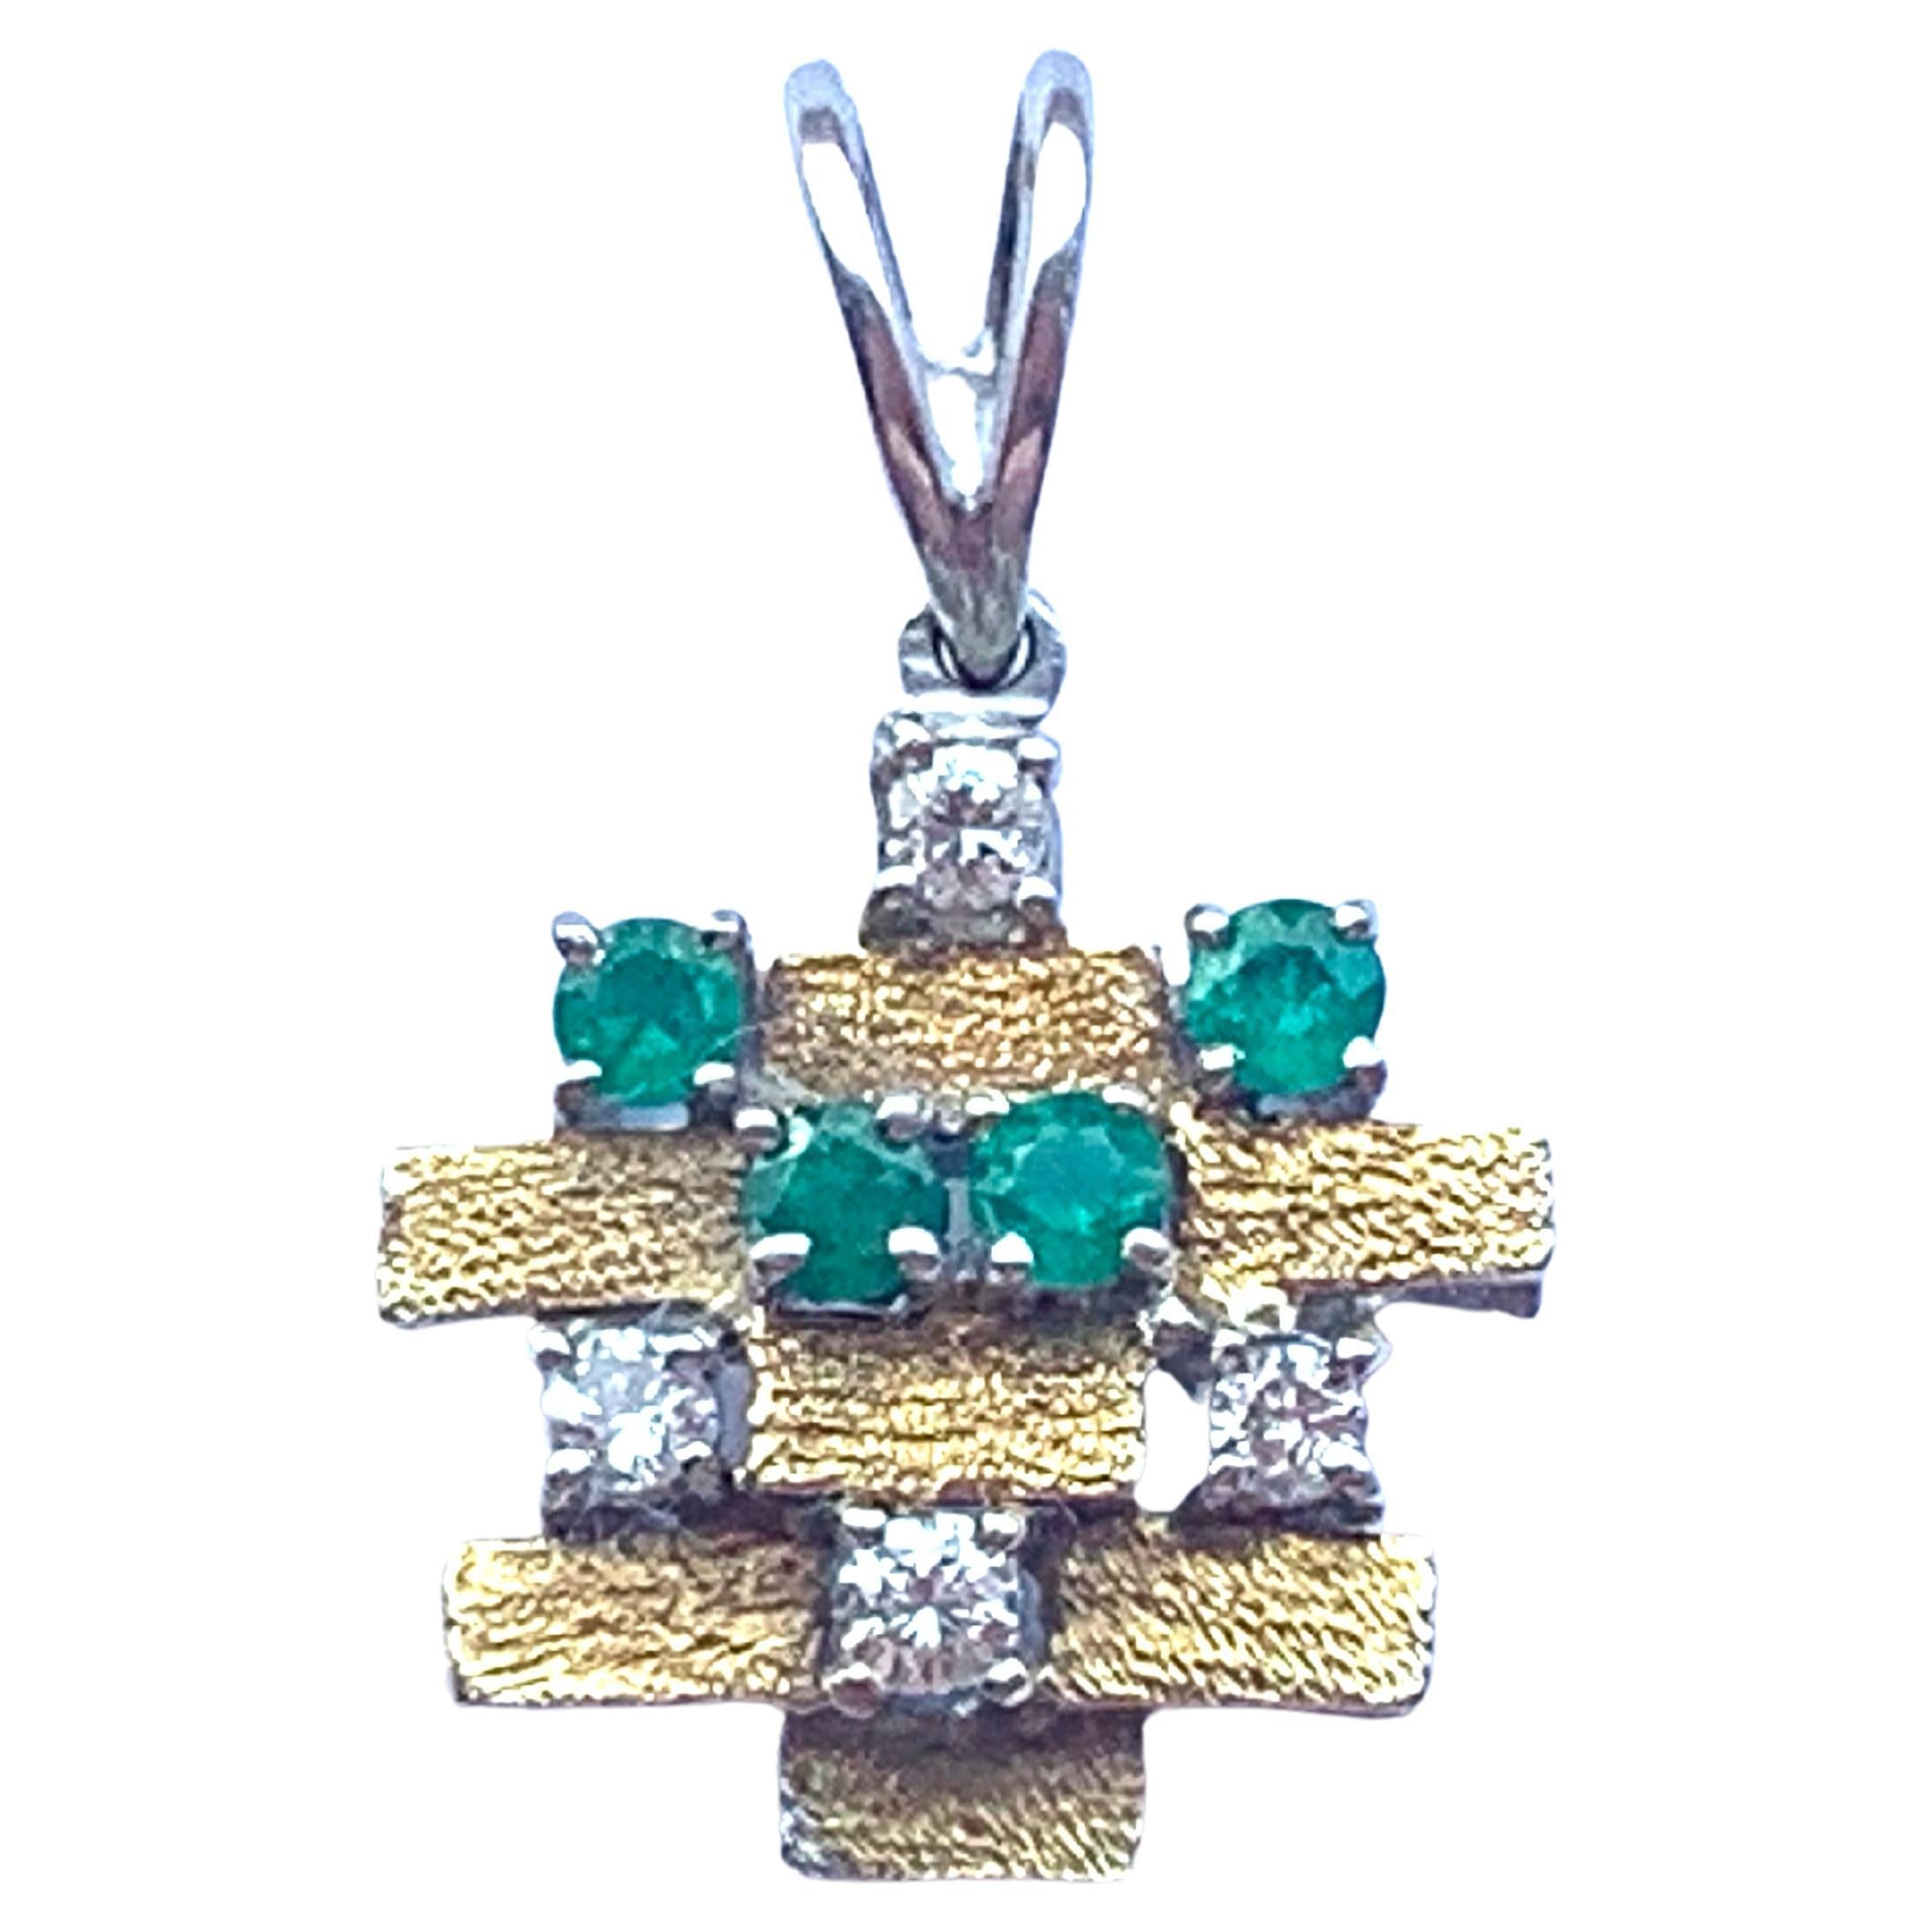 Stunning Brutalist Design
18ct White Gold & Yellow Gold Brick design finish 
adorned with diamonds & emeralds 
4 x 2.5mm diamonds = 0.24 Carats 
4 x 2.5mm Emeralds = 0.24 Carats
Stamped 750 and two other marks which have faded over time.
on a white